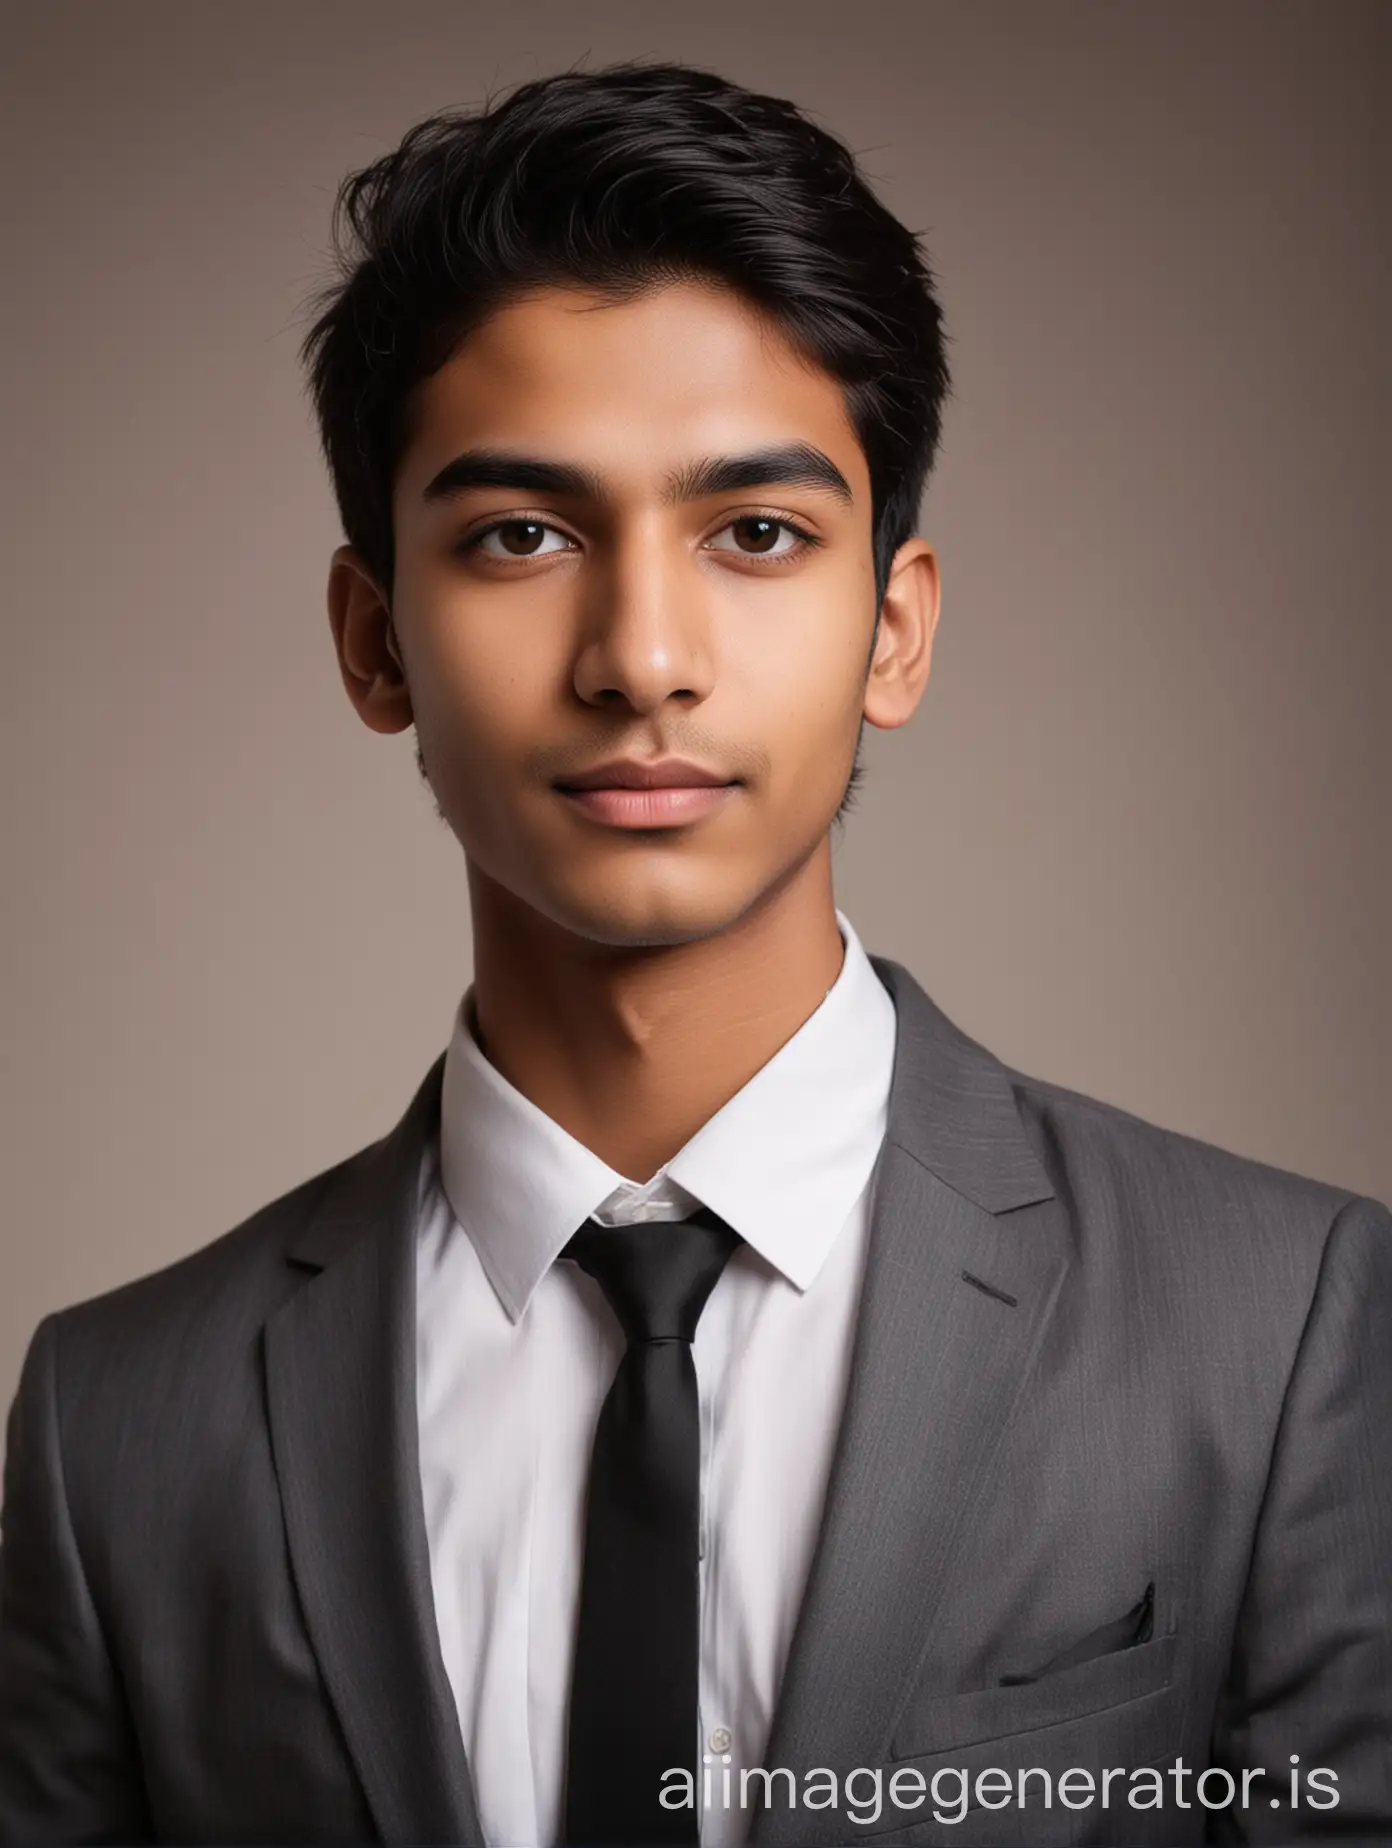 Young-Indian-Man-Poses-Professionally-for-LinkedIn-Profile-Picture